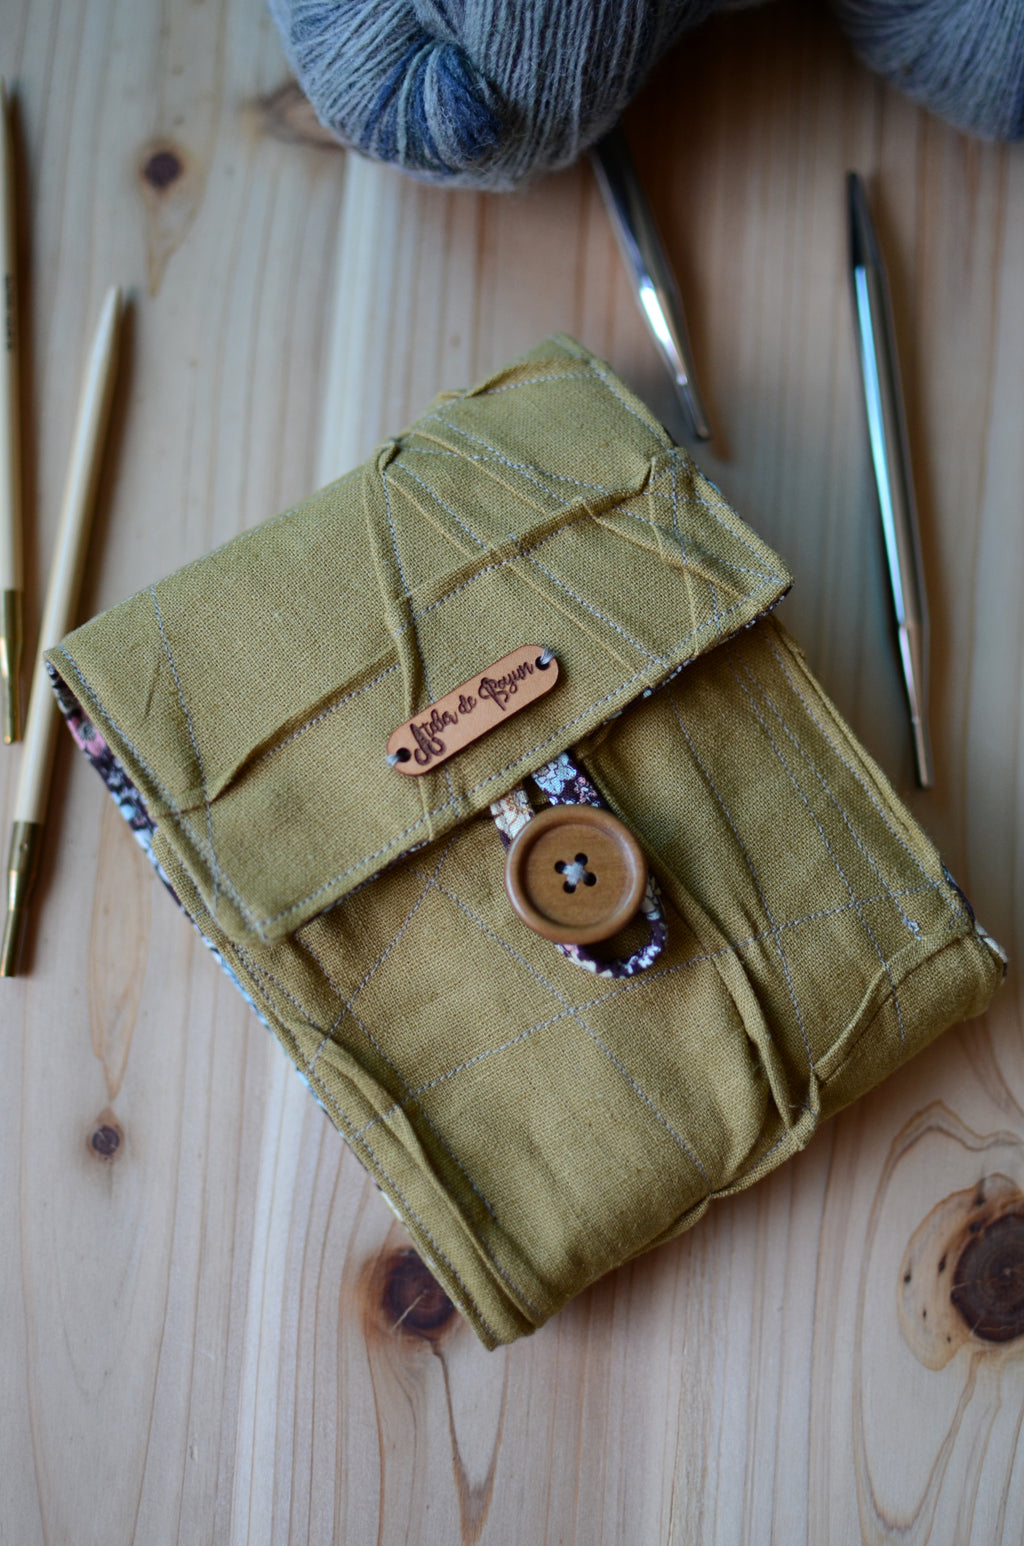 Interchangeable knitting needle storage with a zipper pocket